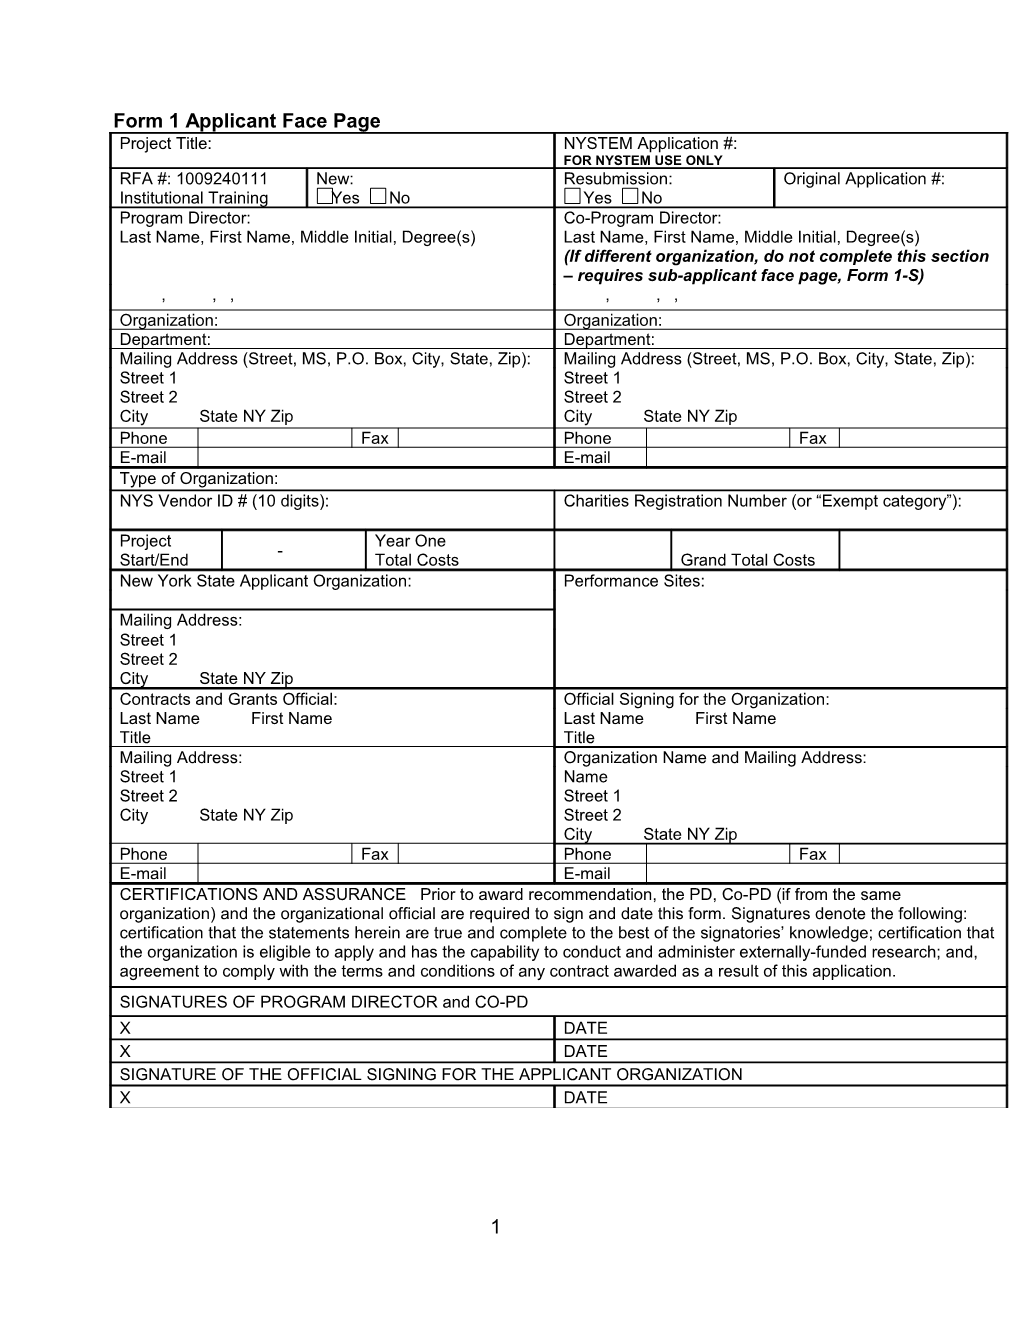 Form 1 Applicant Face Page